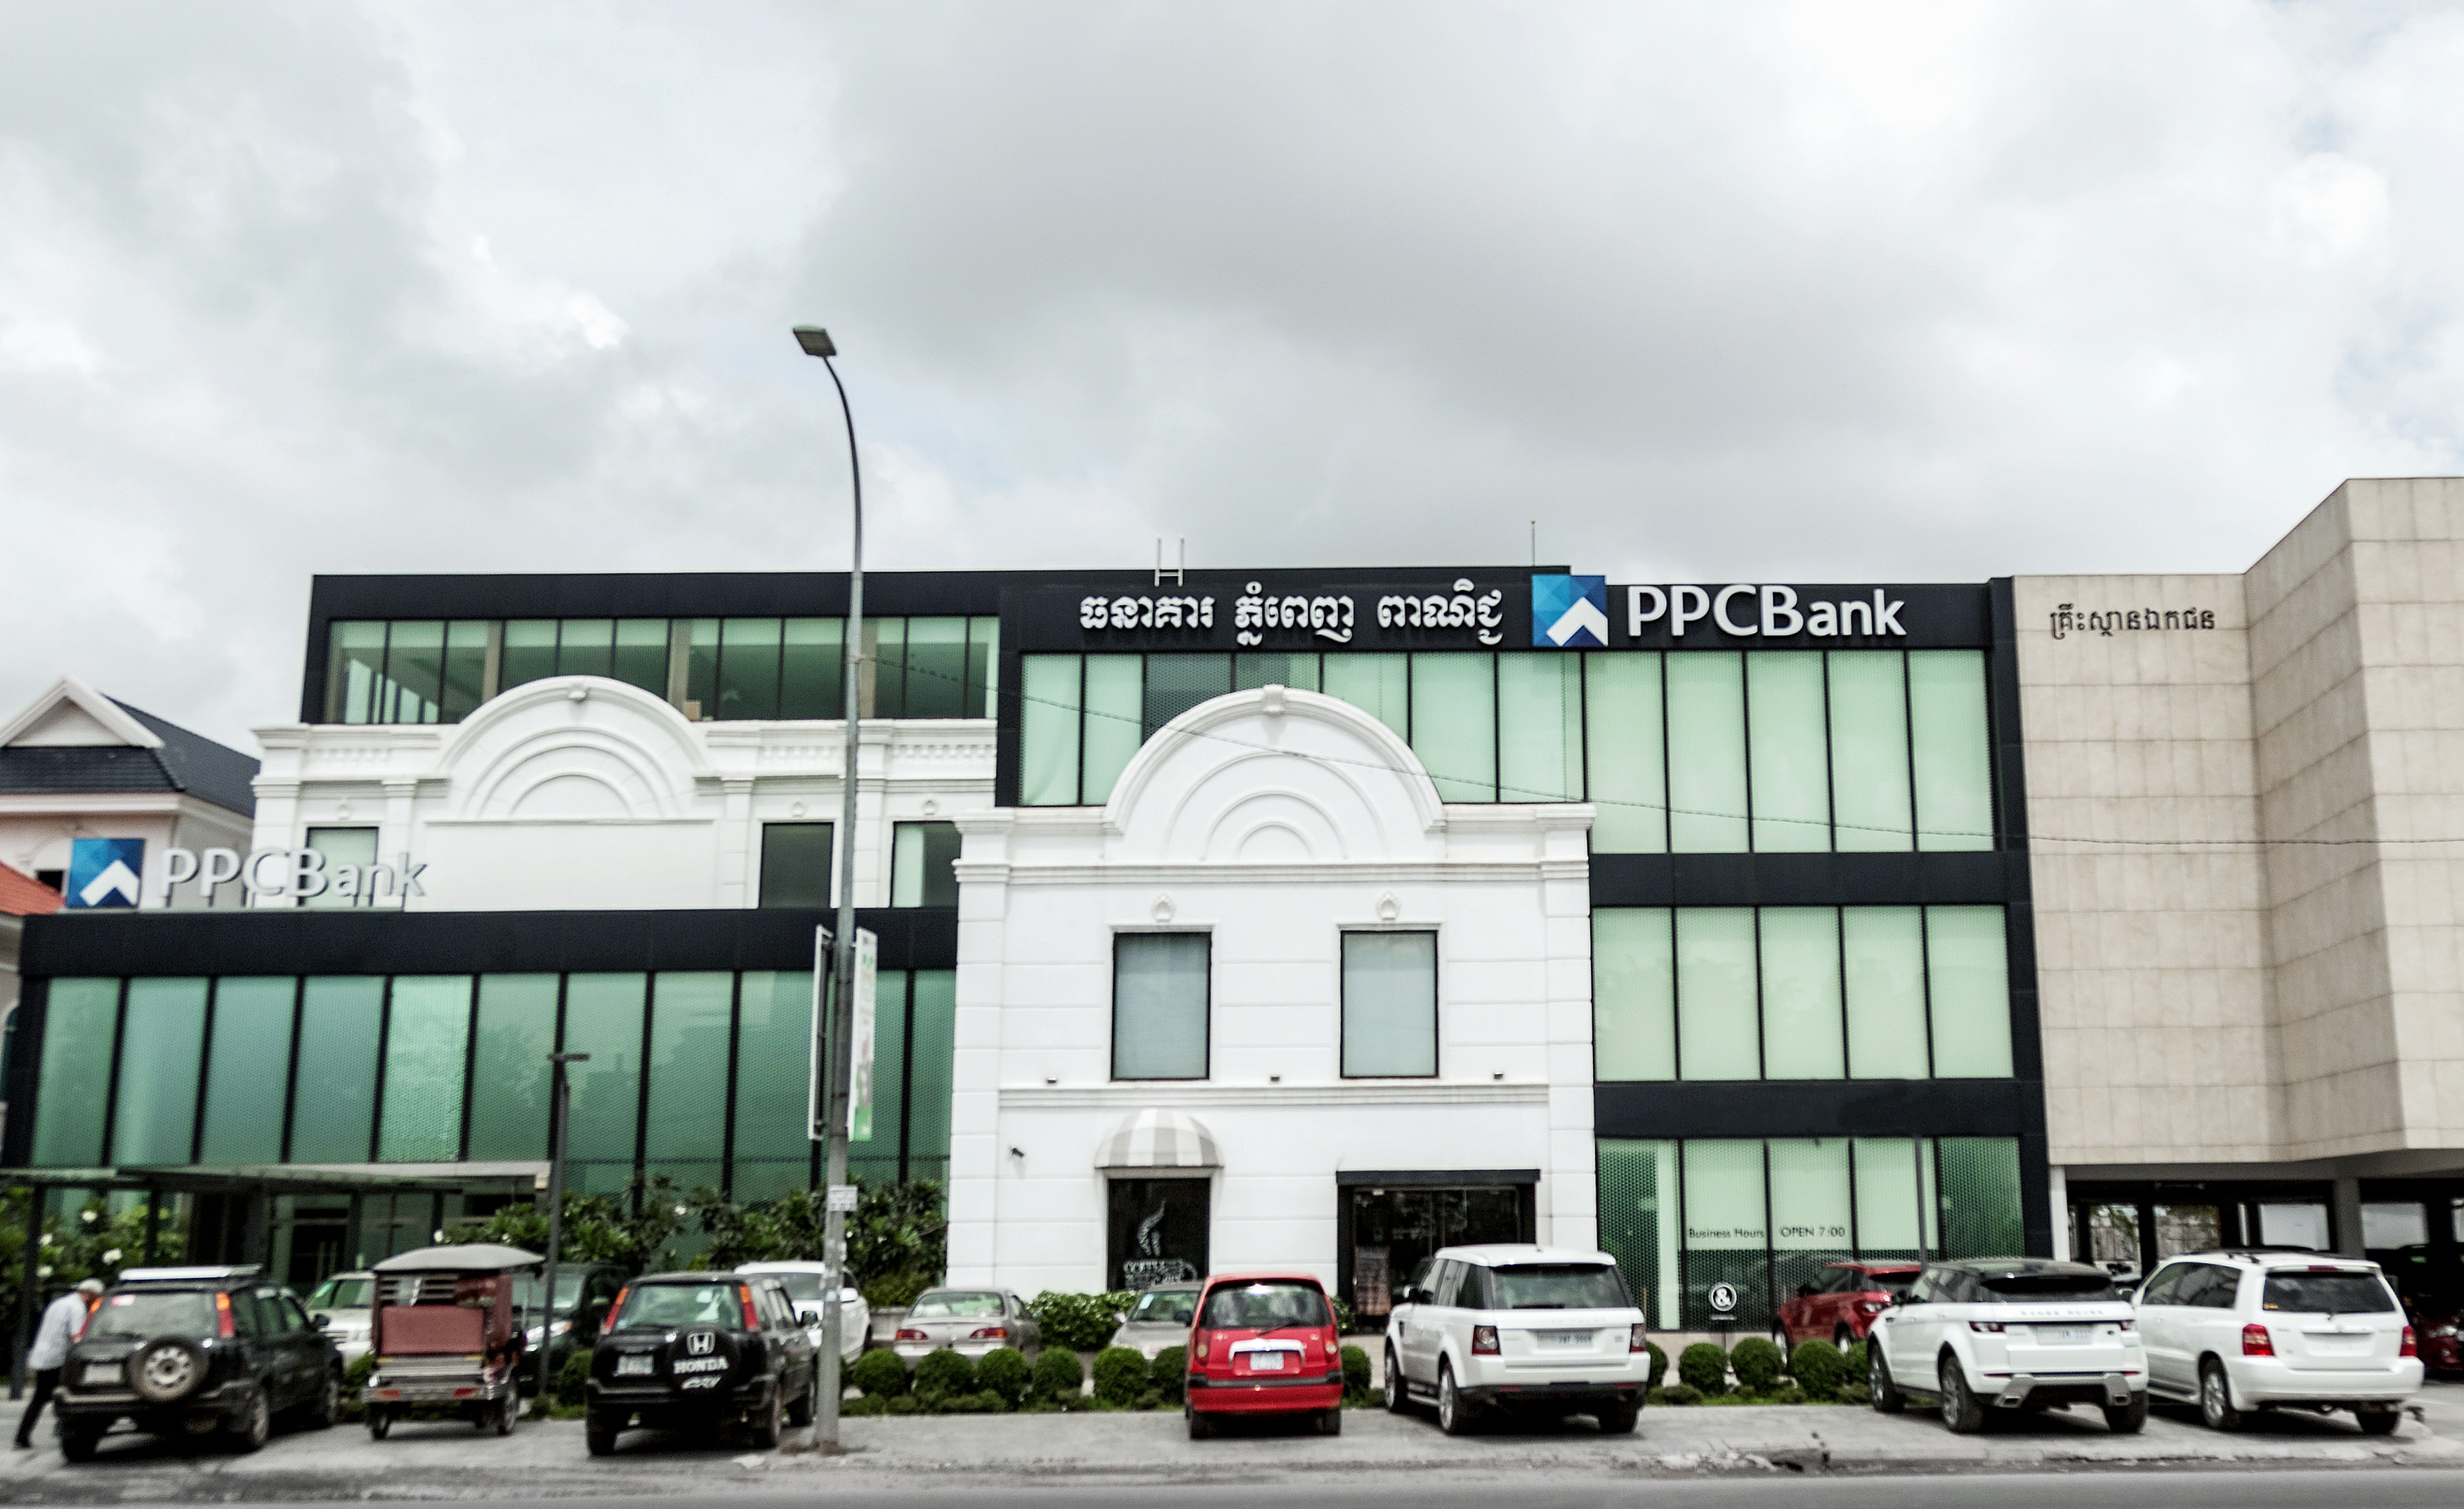  PPCBank offers its customer home loans, borey loans, condo loans and free consultations